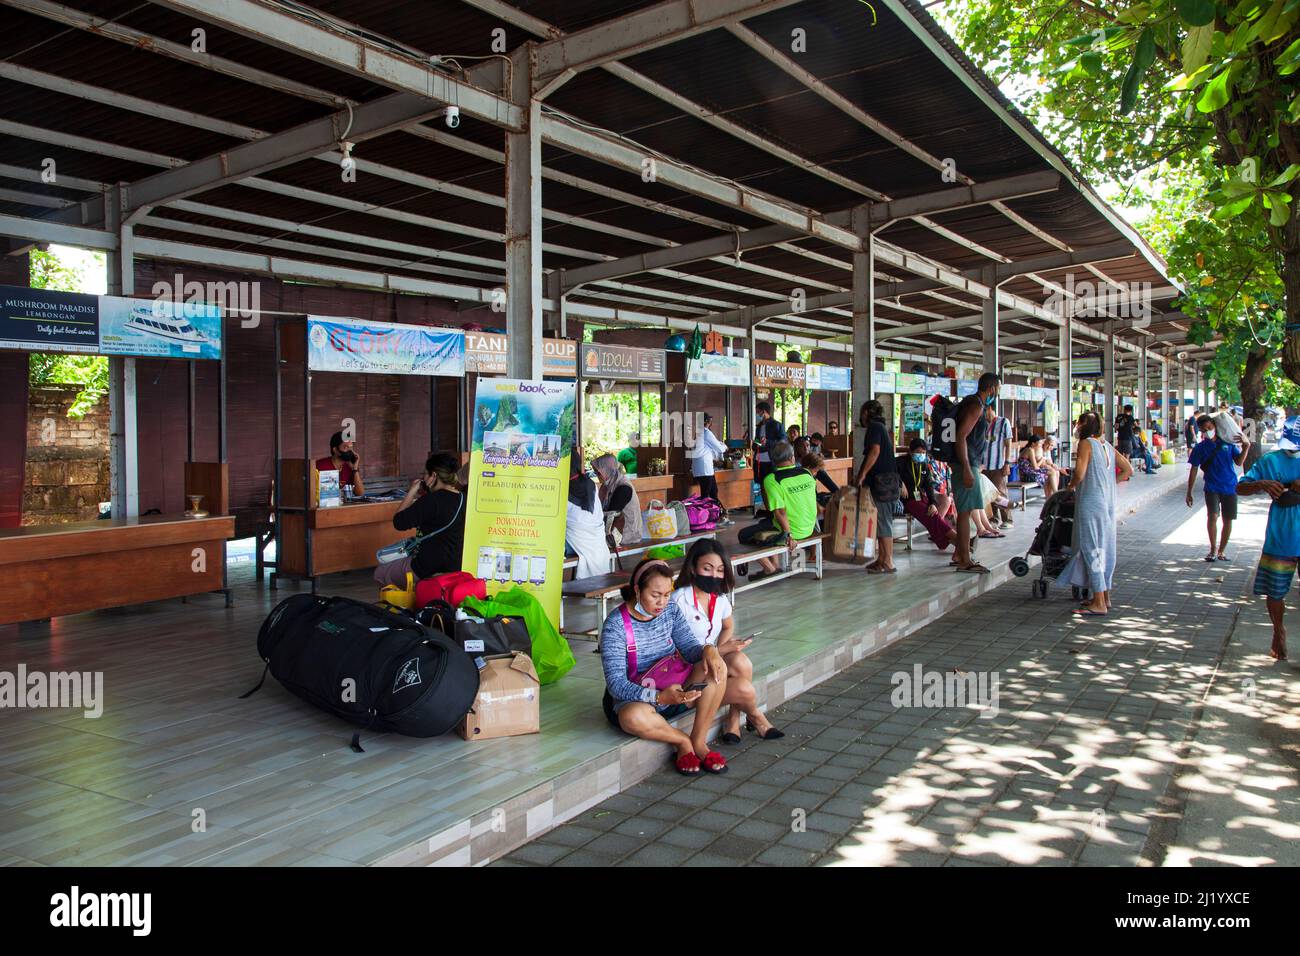 Sanur Ferry Ticket Counter in north Sanur, Bali. Passengers buying boat and ferry tickets to travel to places like Nusa Penida. Stock Photo